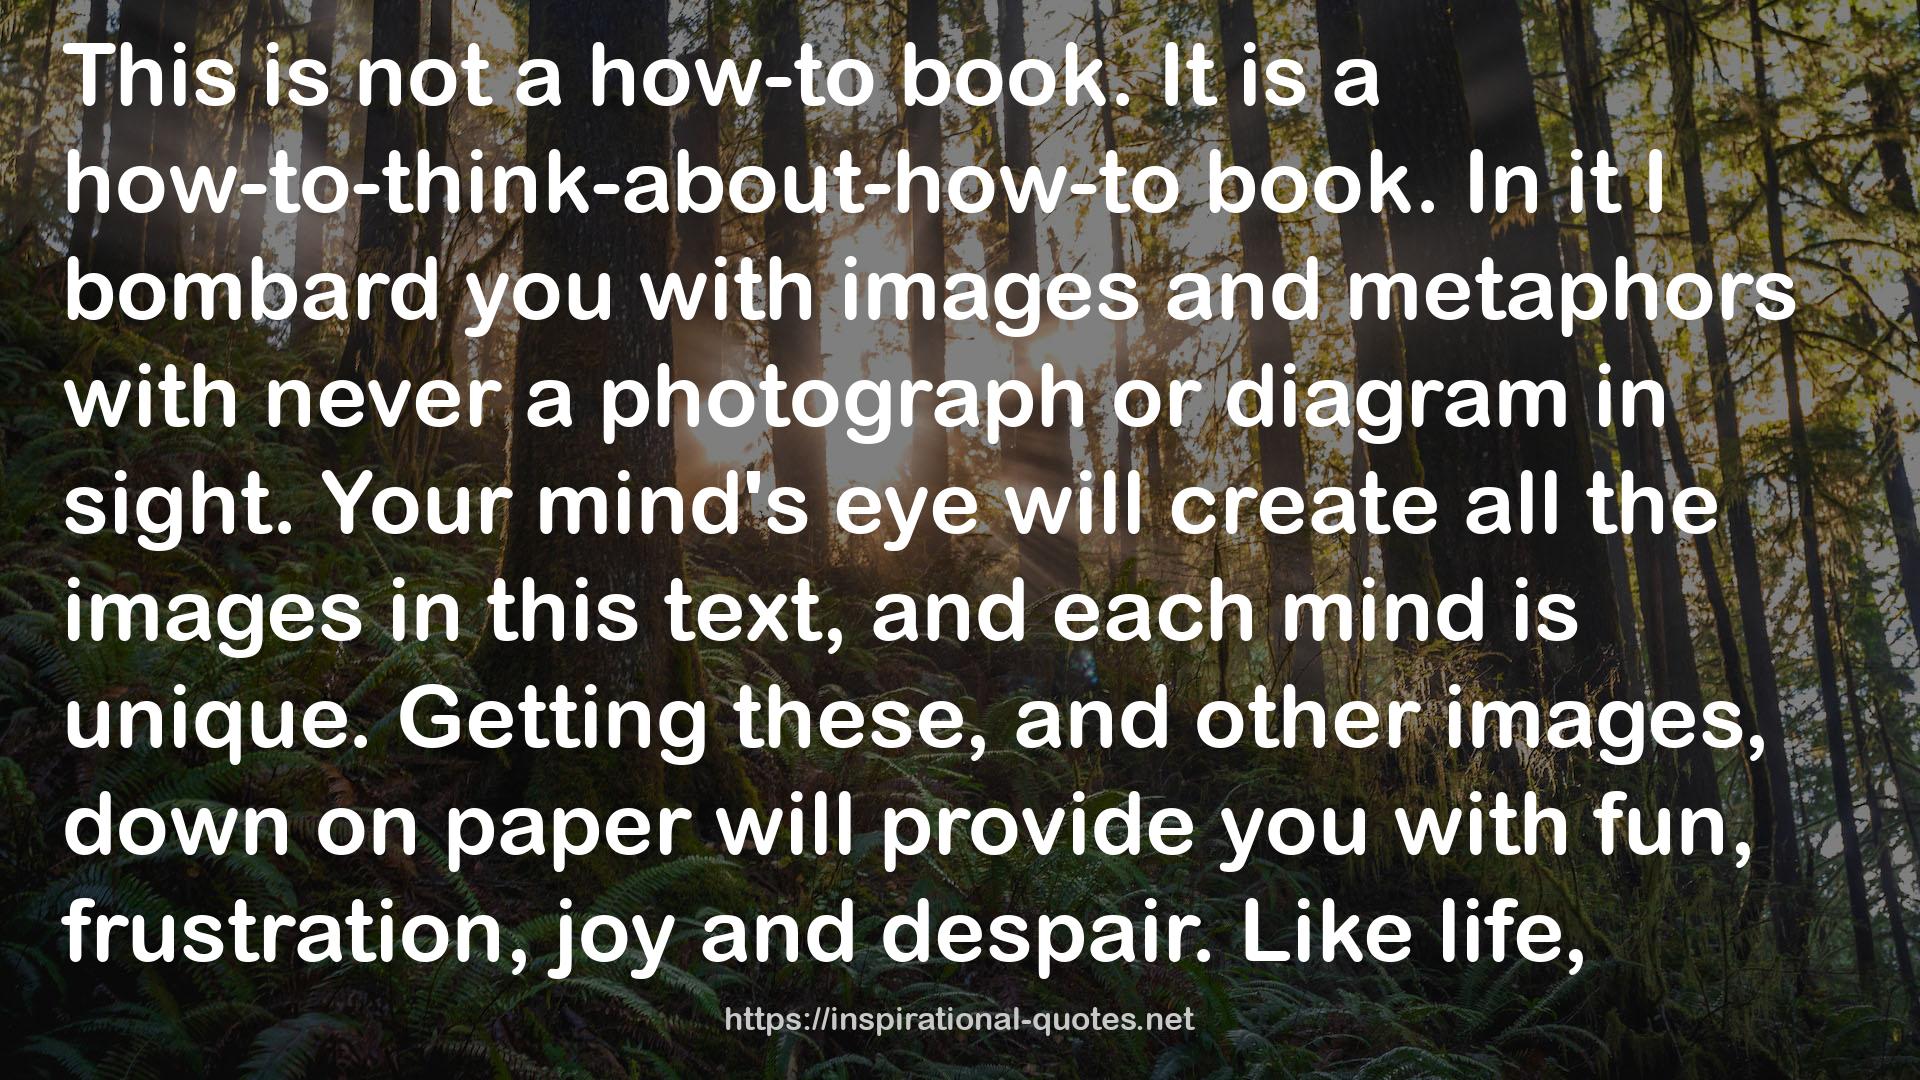 The Mind's Eye: An Introduction to Making Images QUOTES